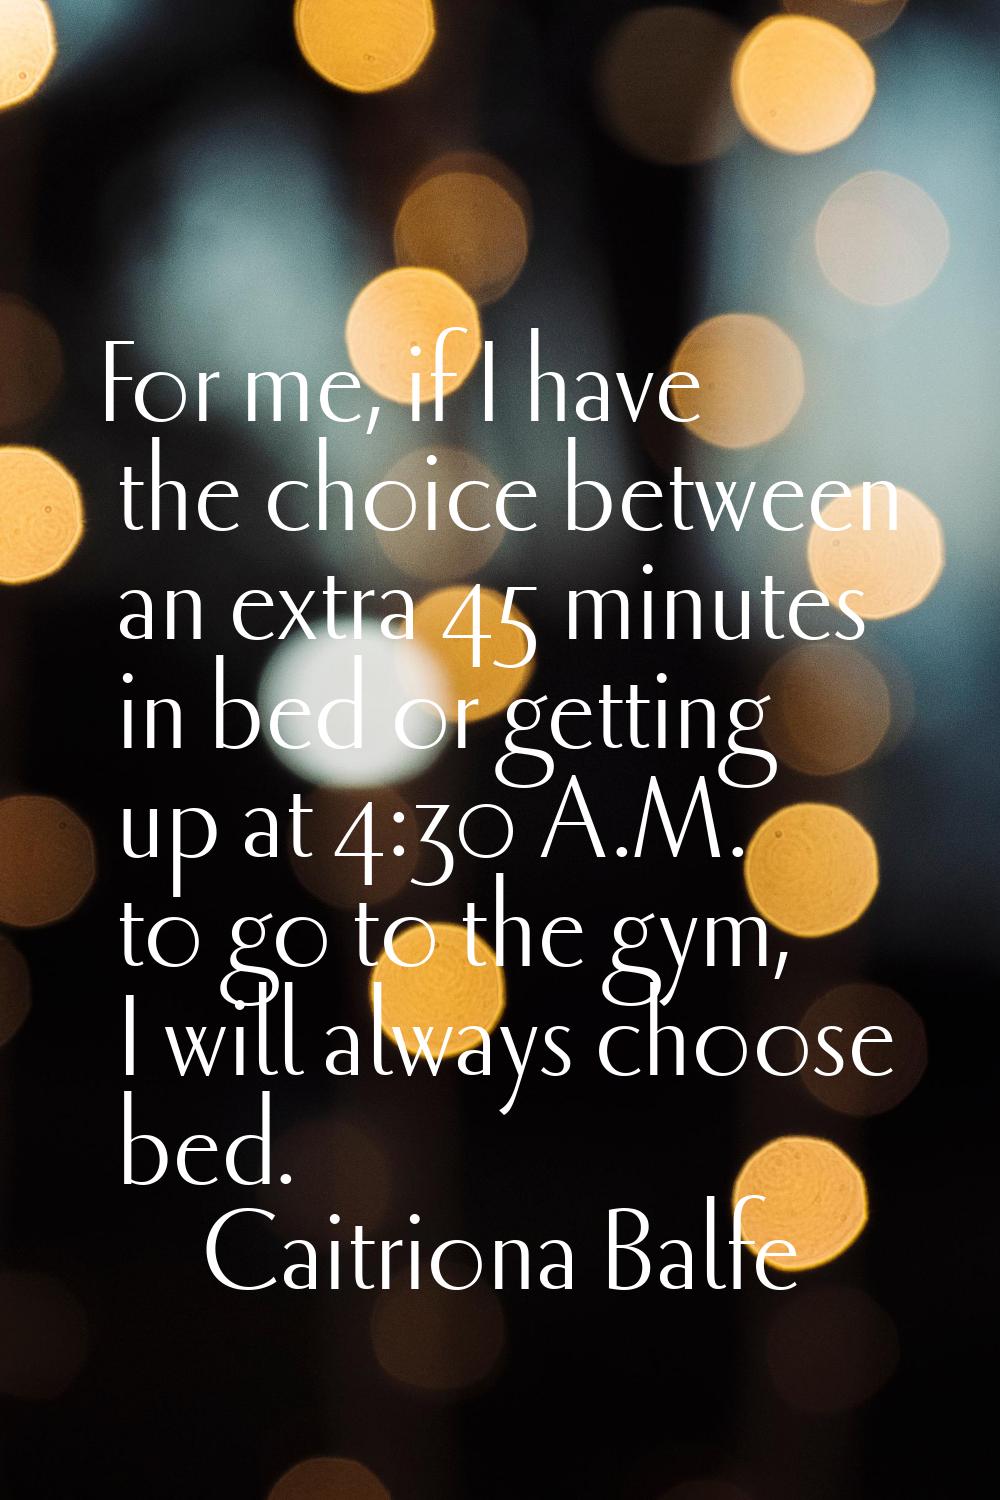 For me, if I have the choice between an extra 45 minutes in bed or getting up at 4:30 A.M. to go to